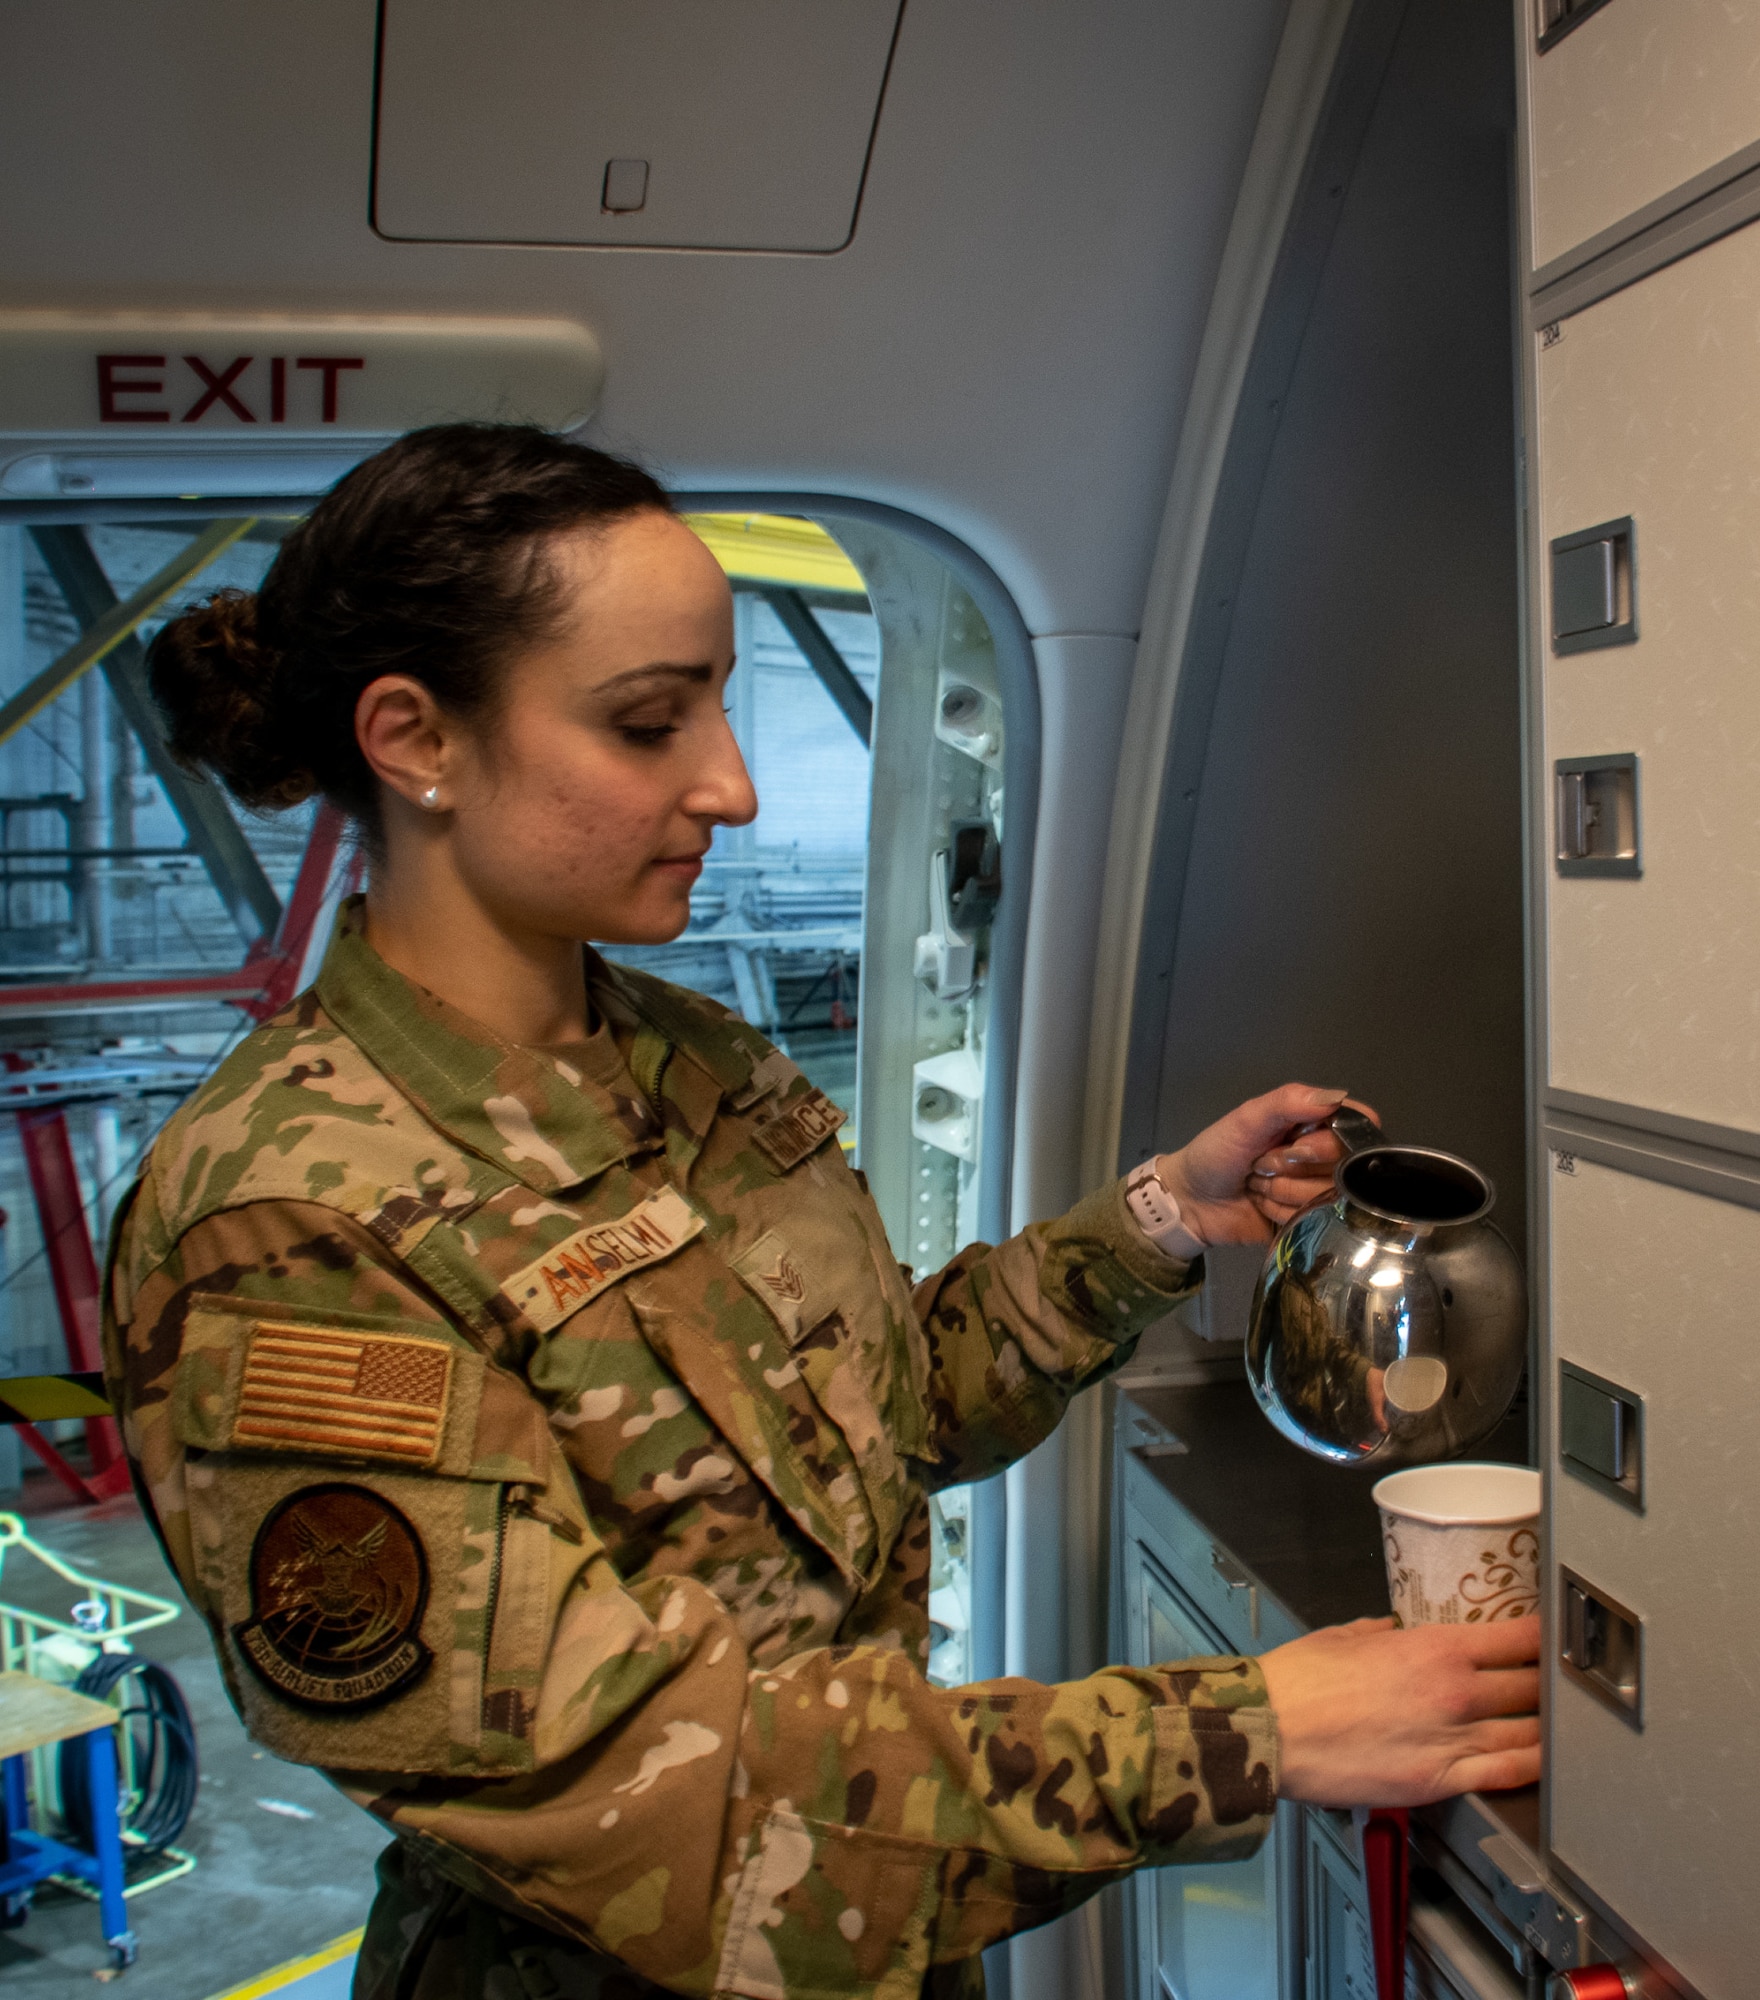 There are many reasons for why Airmen join the military.  Some want to follow in the footsteps of their family, travel the world, or earn education benefits.  
One Air Force Reserve flight attendant had other motivations, which began after earning her private pilot’s license at the age of 18 in Italy.
Staff Sgt. Carola Anselmi, 73rd Airlift Squadron flight attendant, a native of a town called Catania, in Sicily, Italy, immigrated to the U.S.  After immigrating, she later joined the Air Force to further her aviation career, but then transferred to the AF Reserves to become a flight attendant.
Though Anselmi had a strong background in aviation and aeronautical engineering at the time she enlisted, she was placed in the bioenvironmental engineering career field.